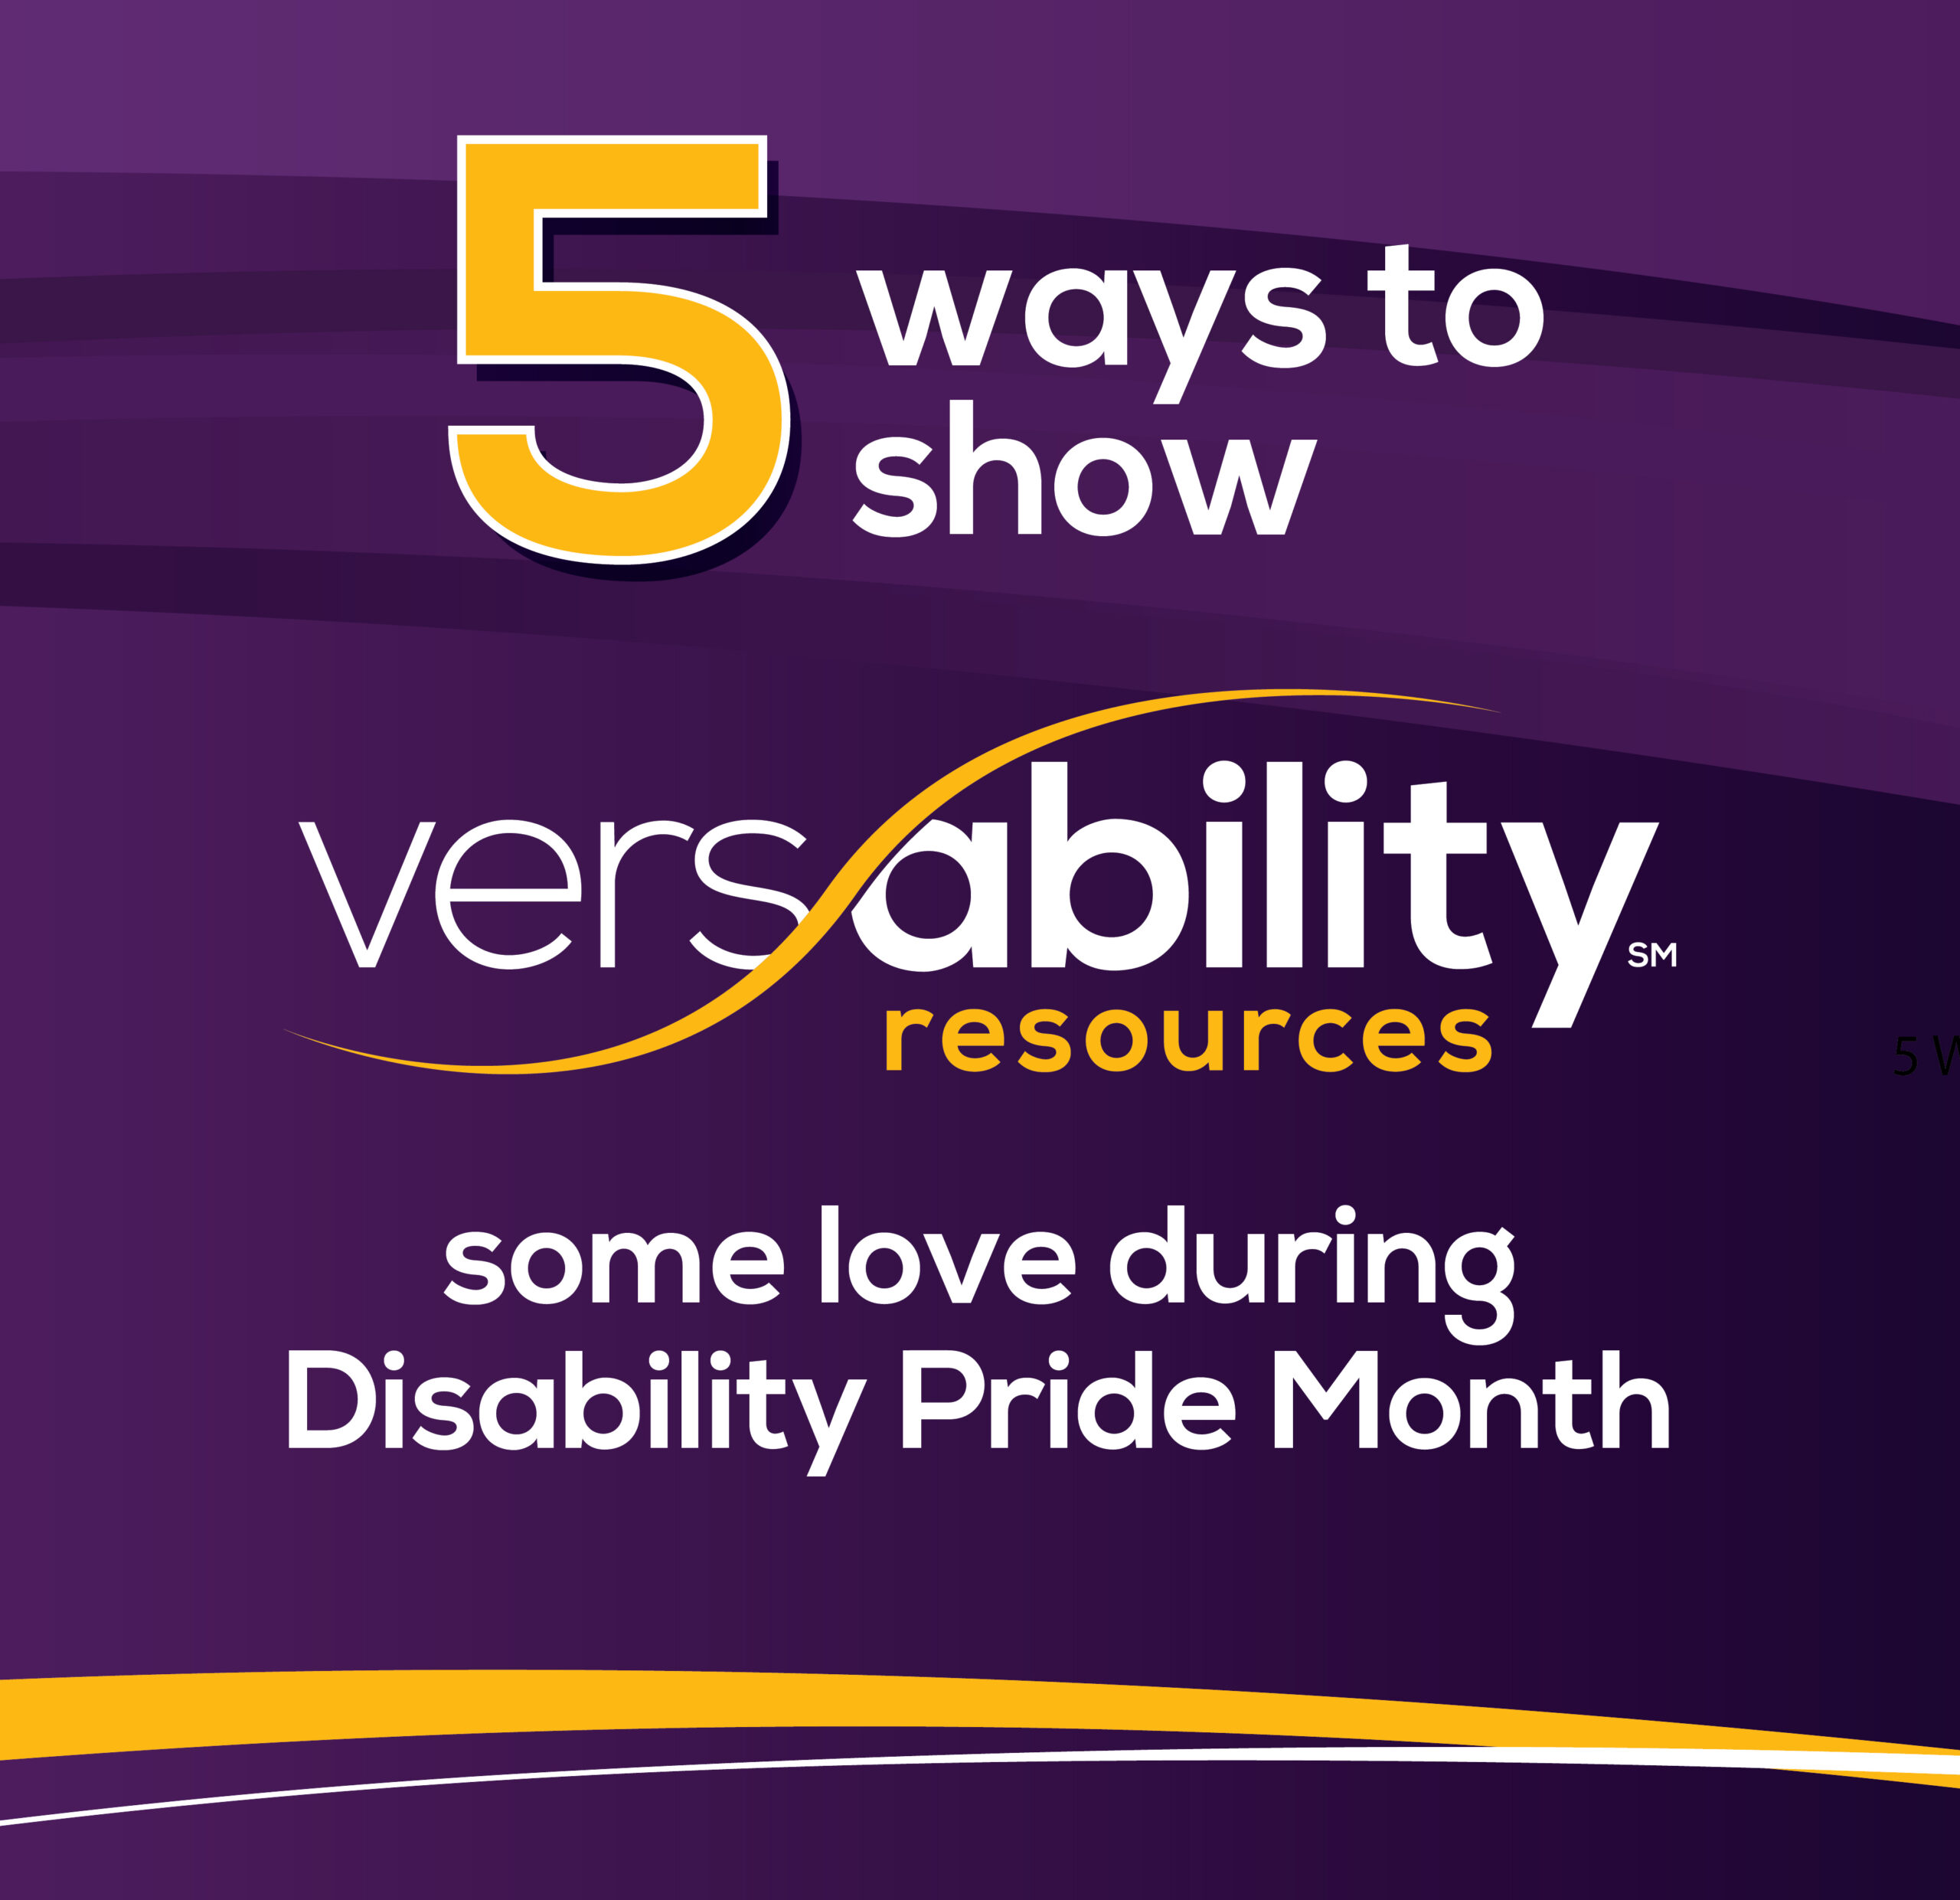 5 Ways to Show VersAbility Resources Some Love During Disability Pride Month